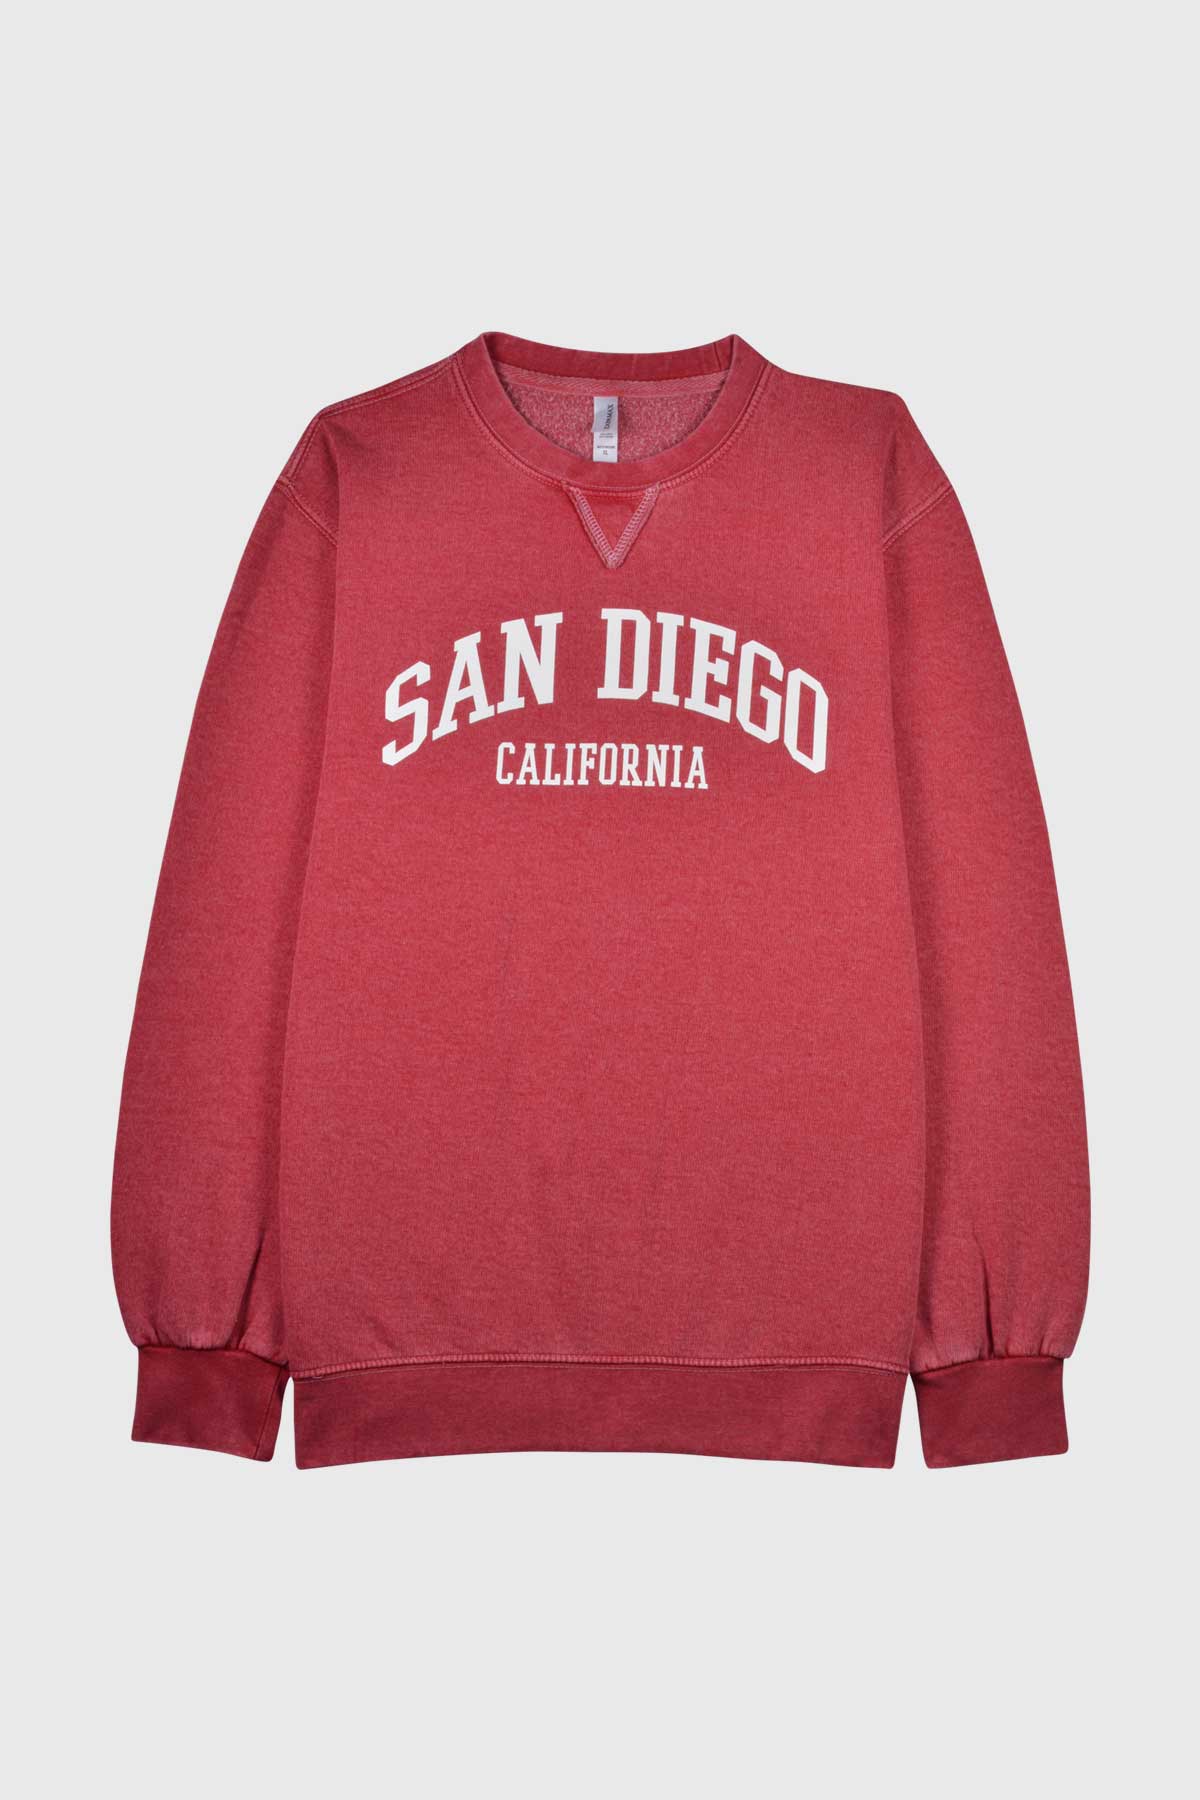 San Diego Sweatshirts - for Cozy Comfort and Local Vibes – ZAPAMAX